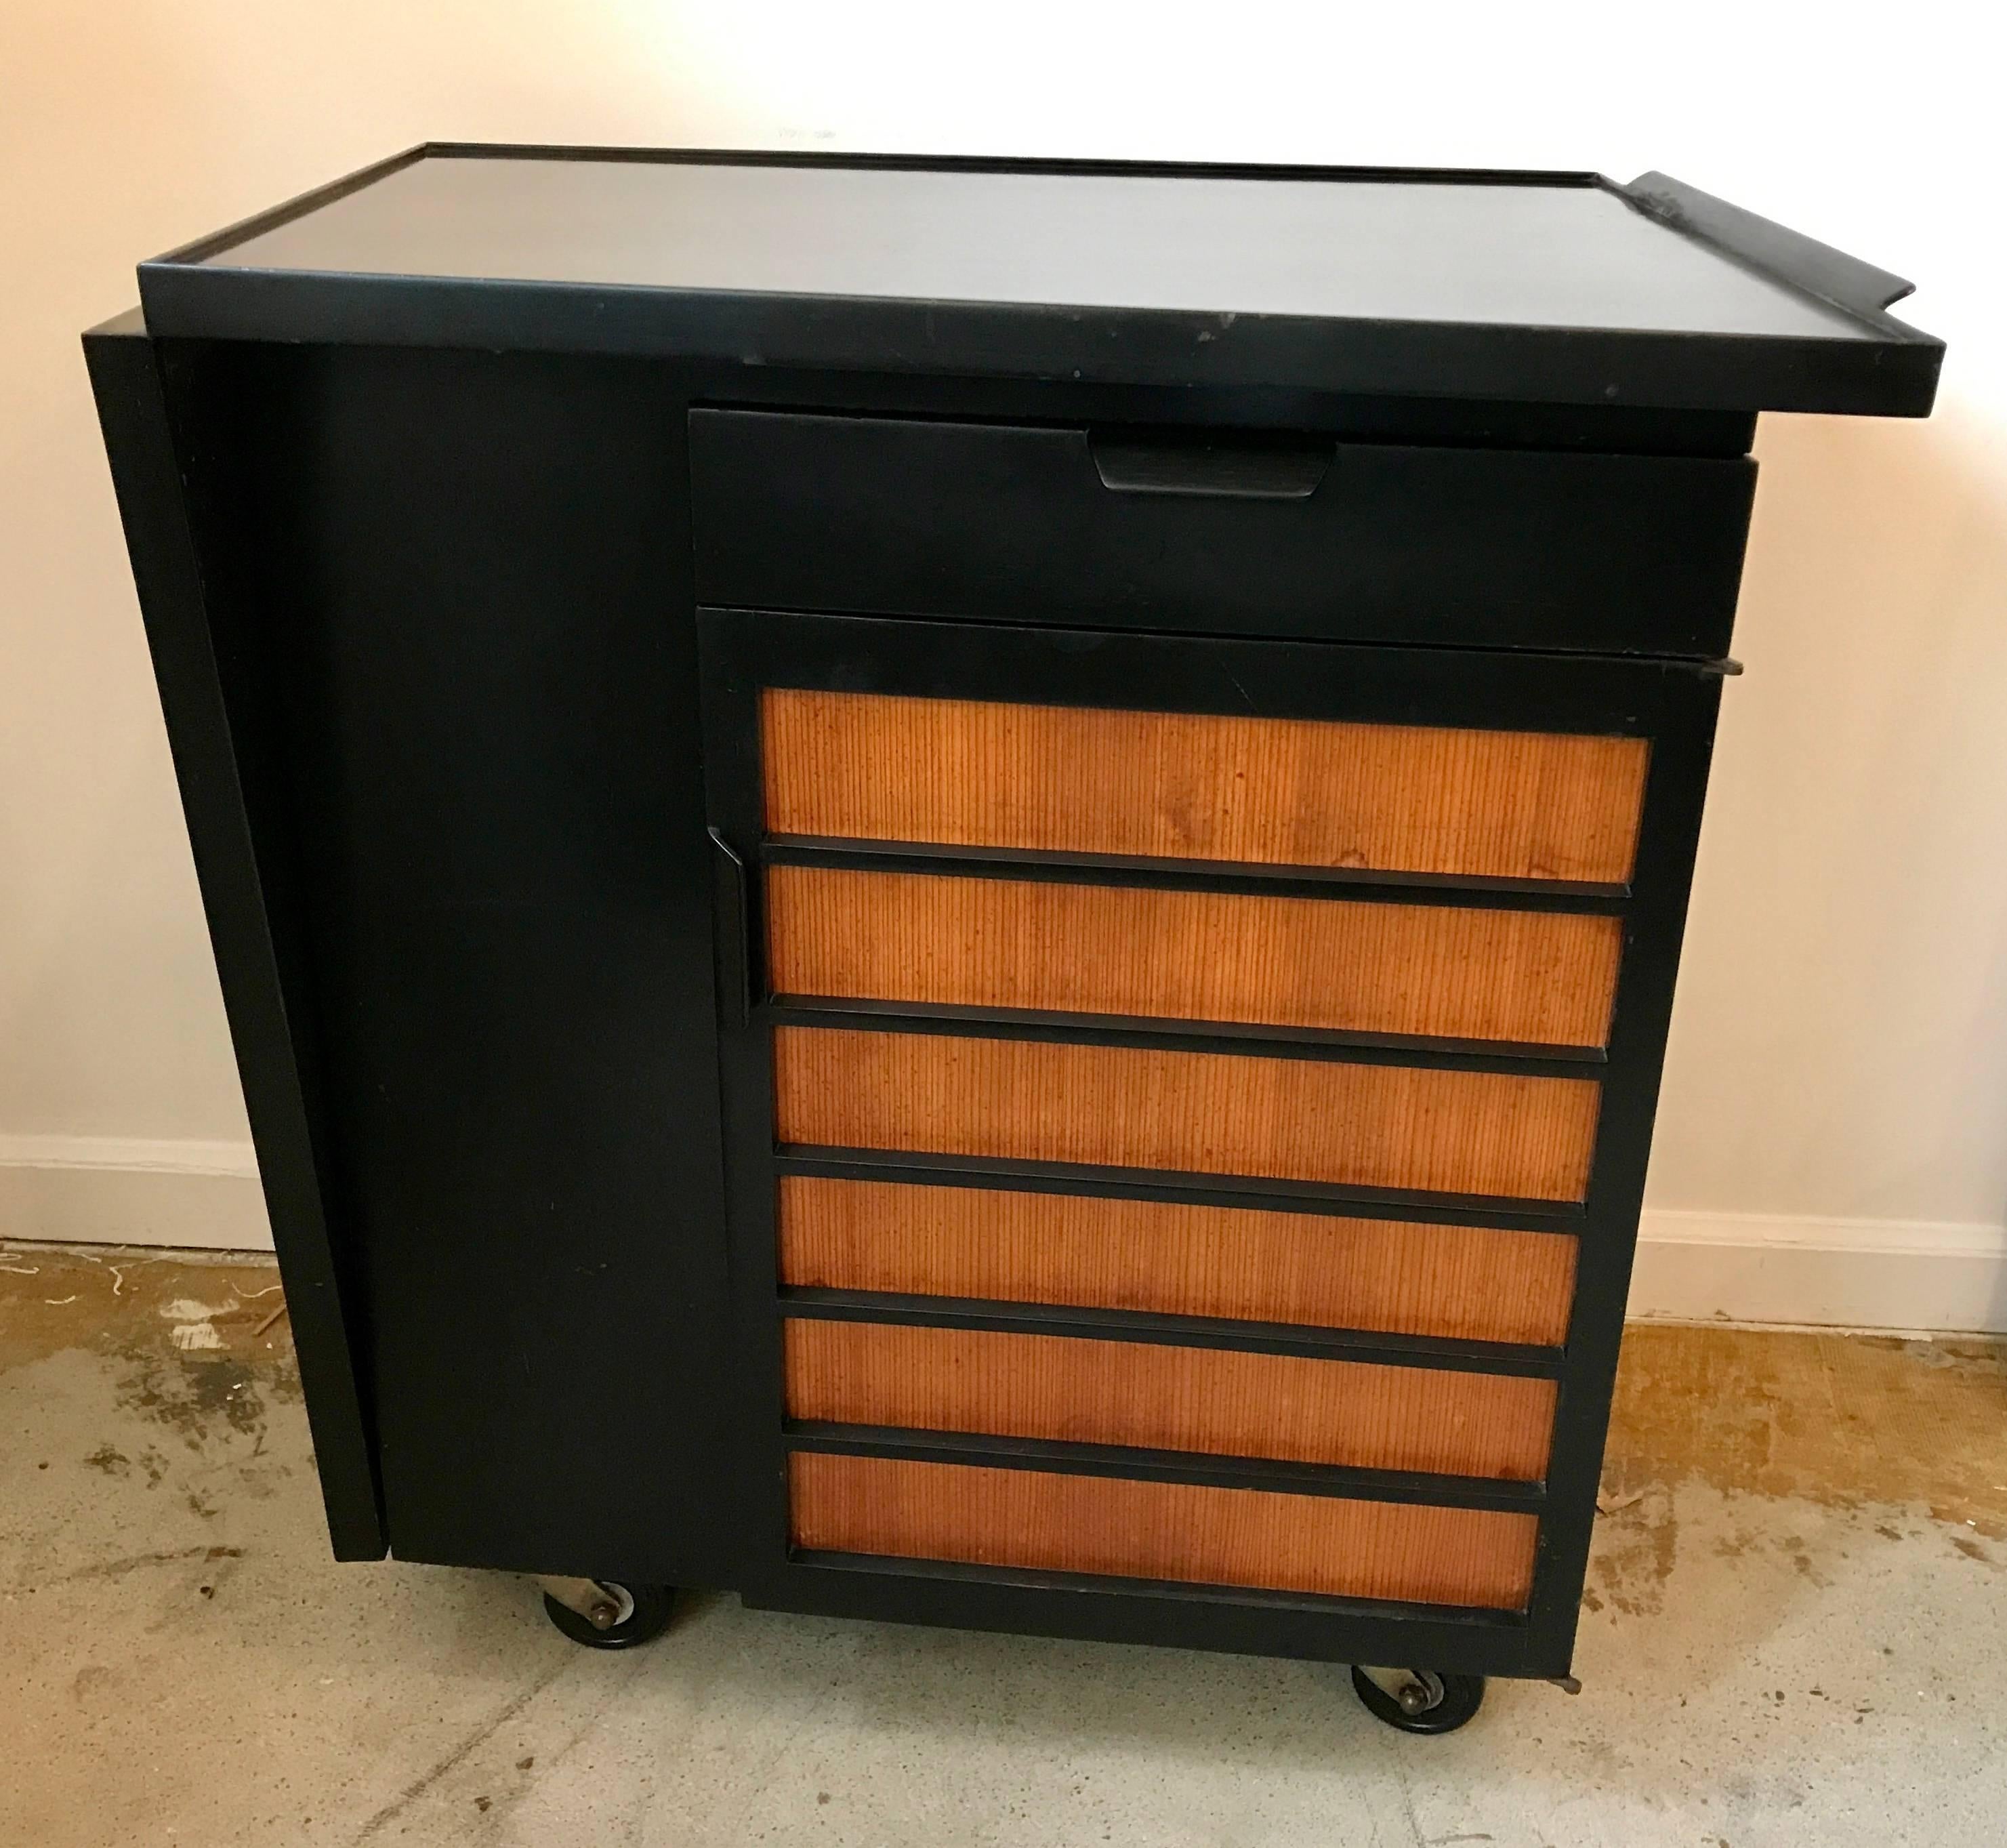 Very rare black Edward Wormley for Dunbar party server bar cart model 5433. This 1950s bar cart features one drawer and one door compartment concealing one adjustable shelve along with one 27-inch fold down tabletop extension. Tabletop measures 54